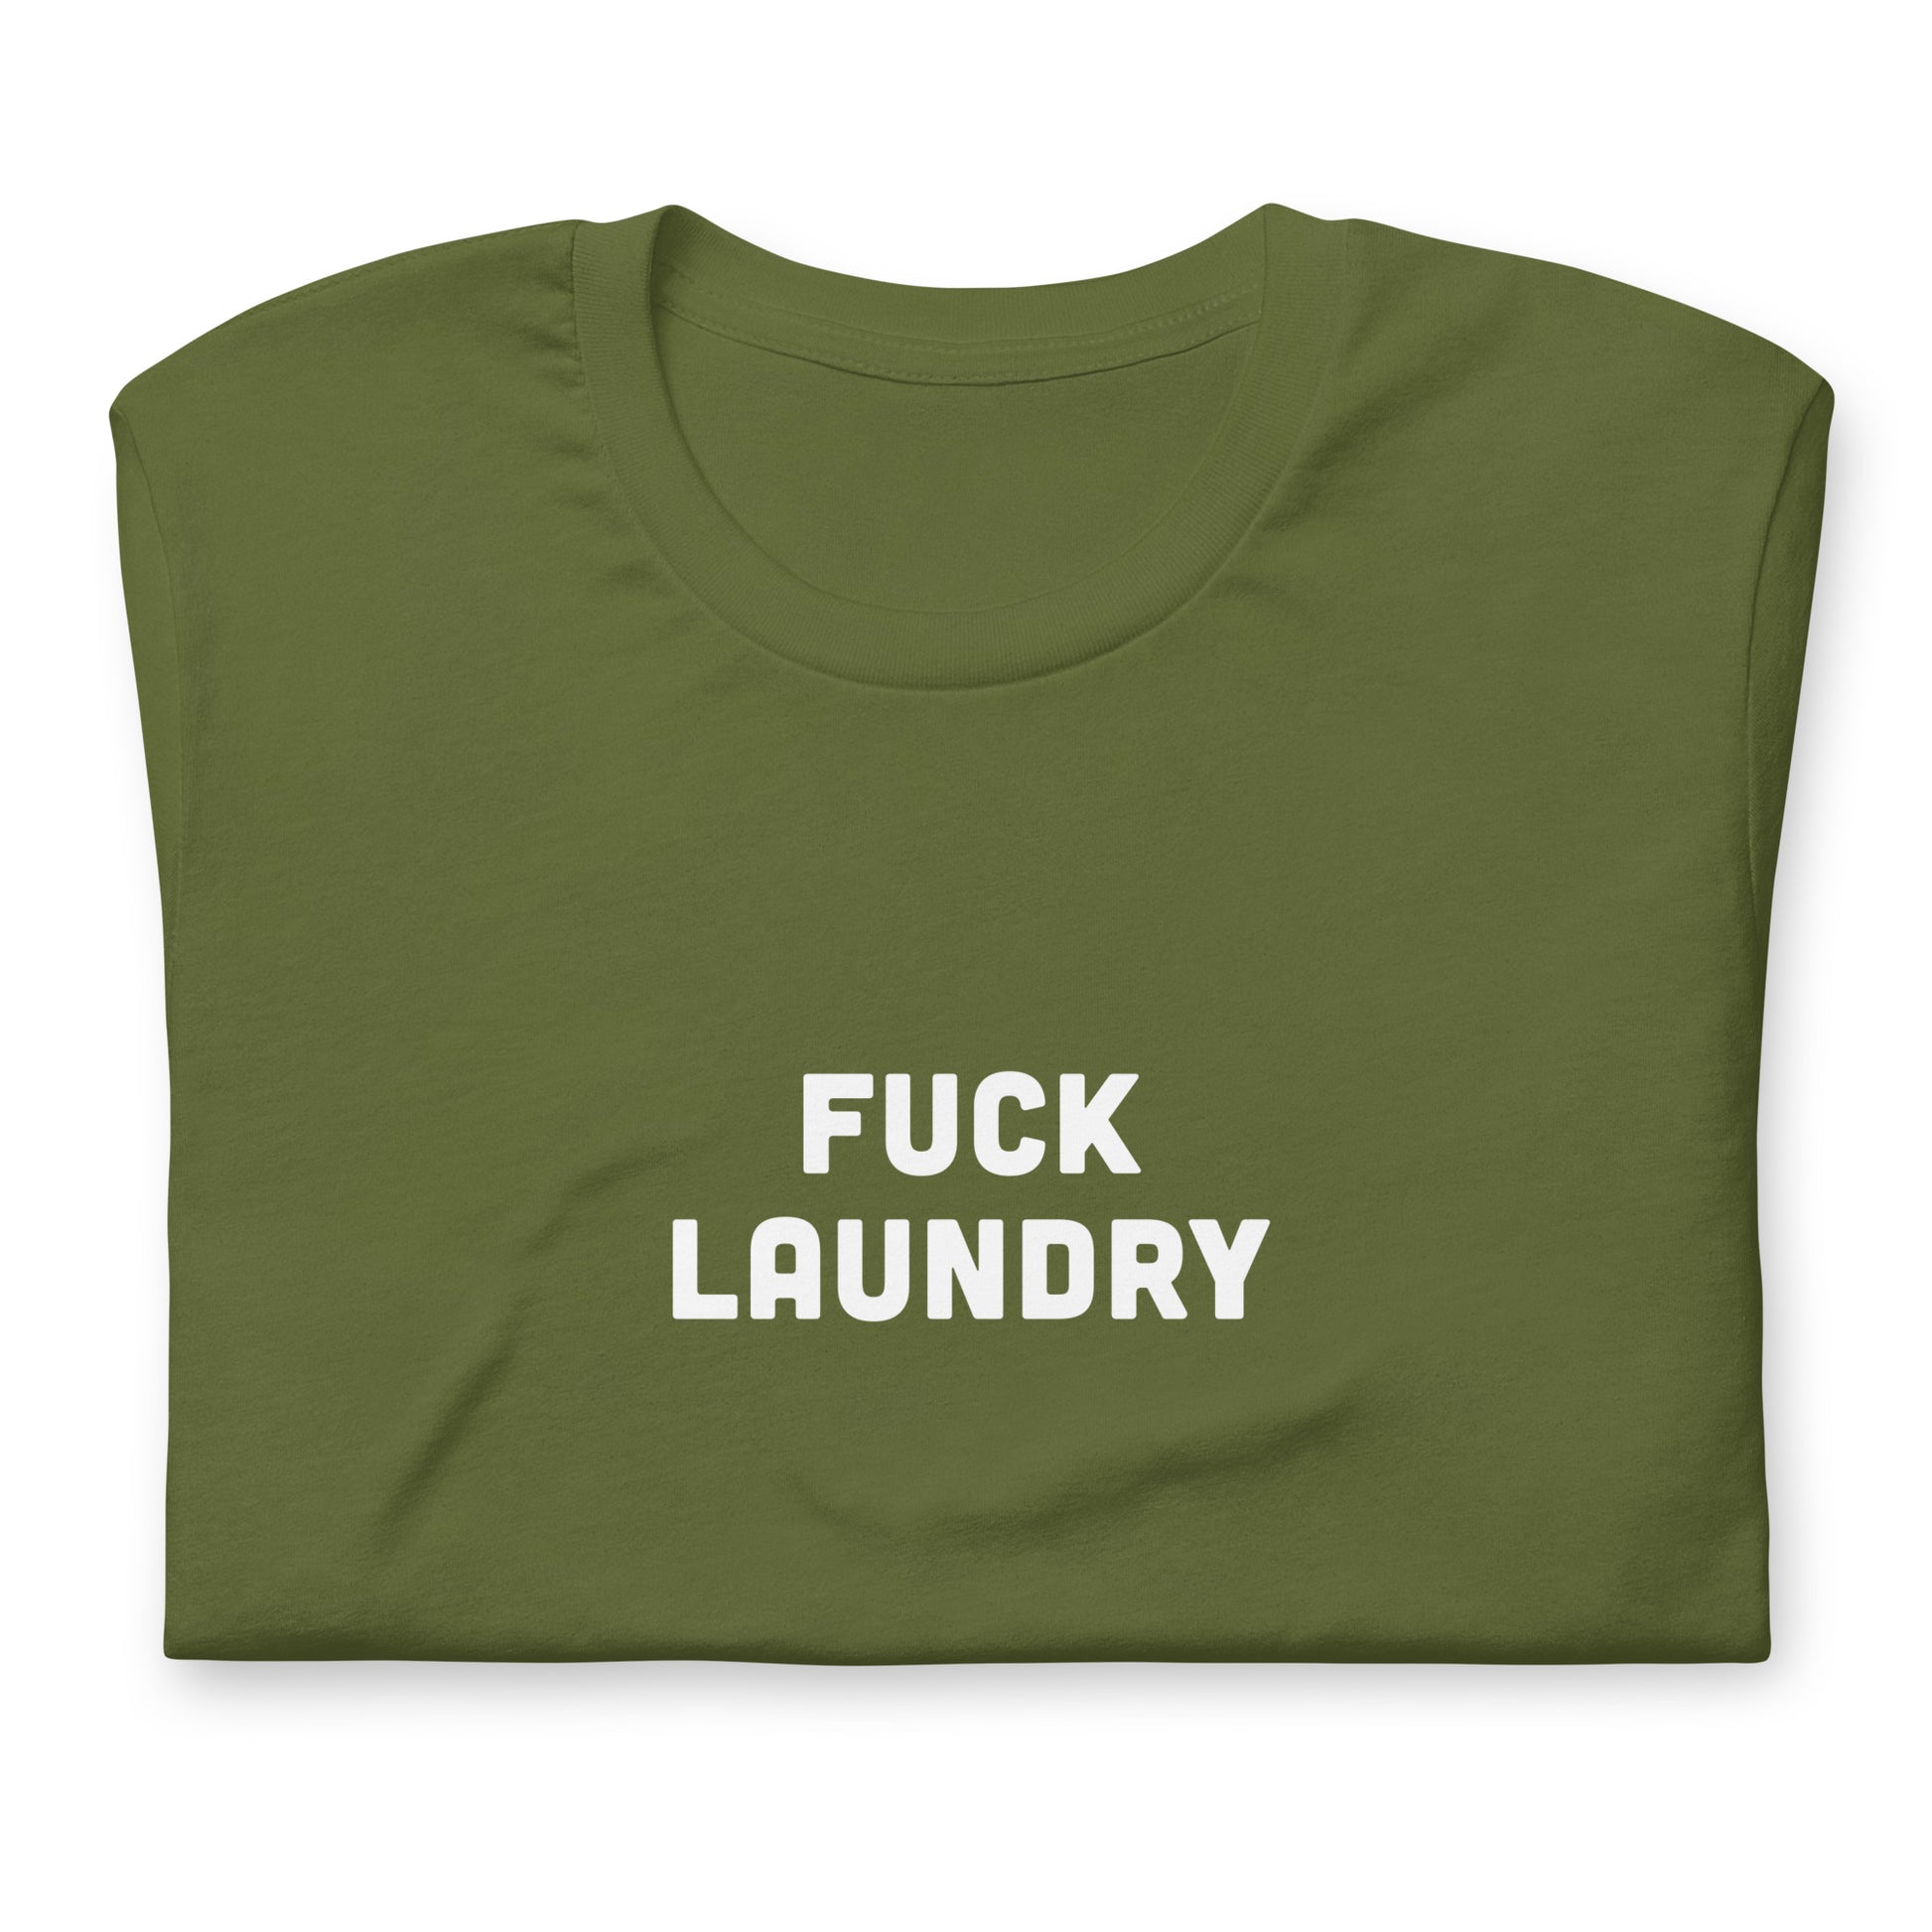 Fuck Laundry T-Shirt Size S Color Navy